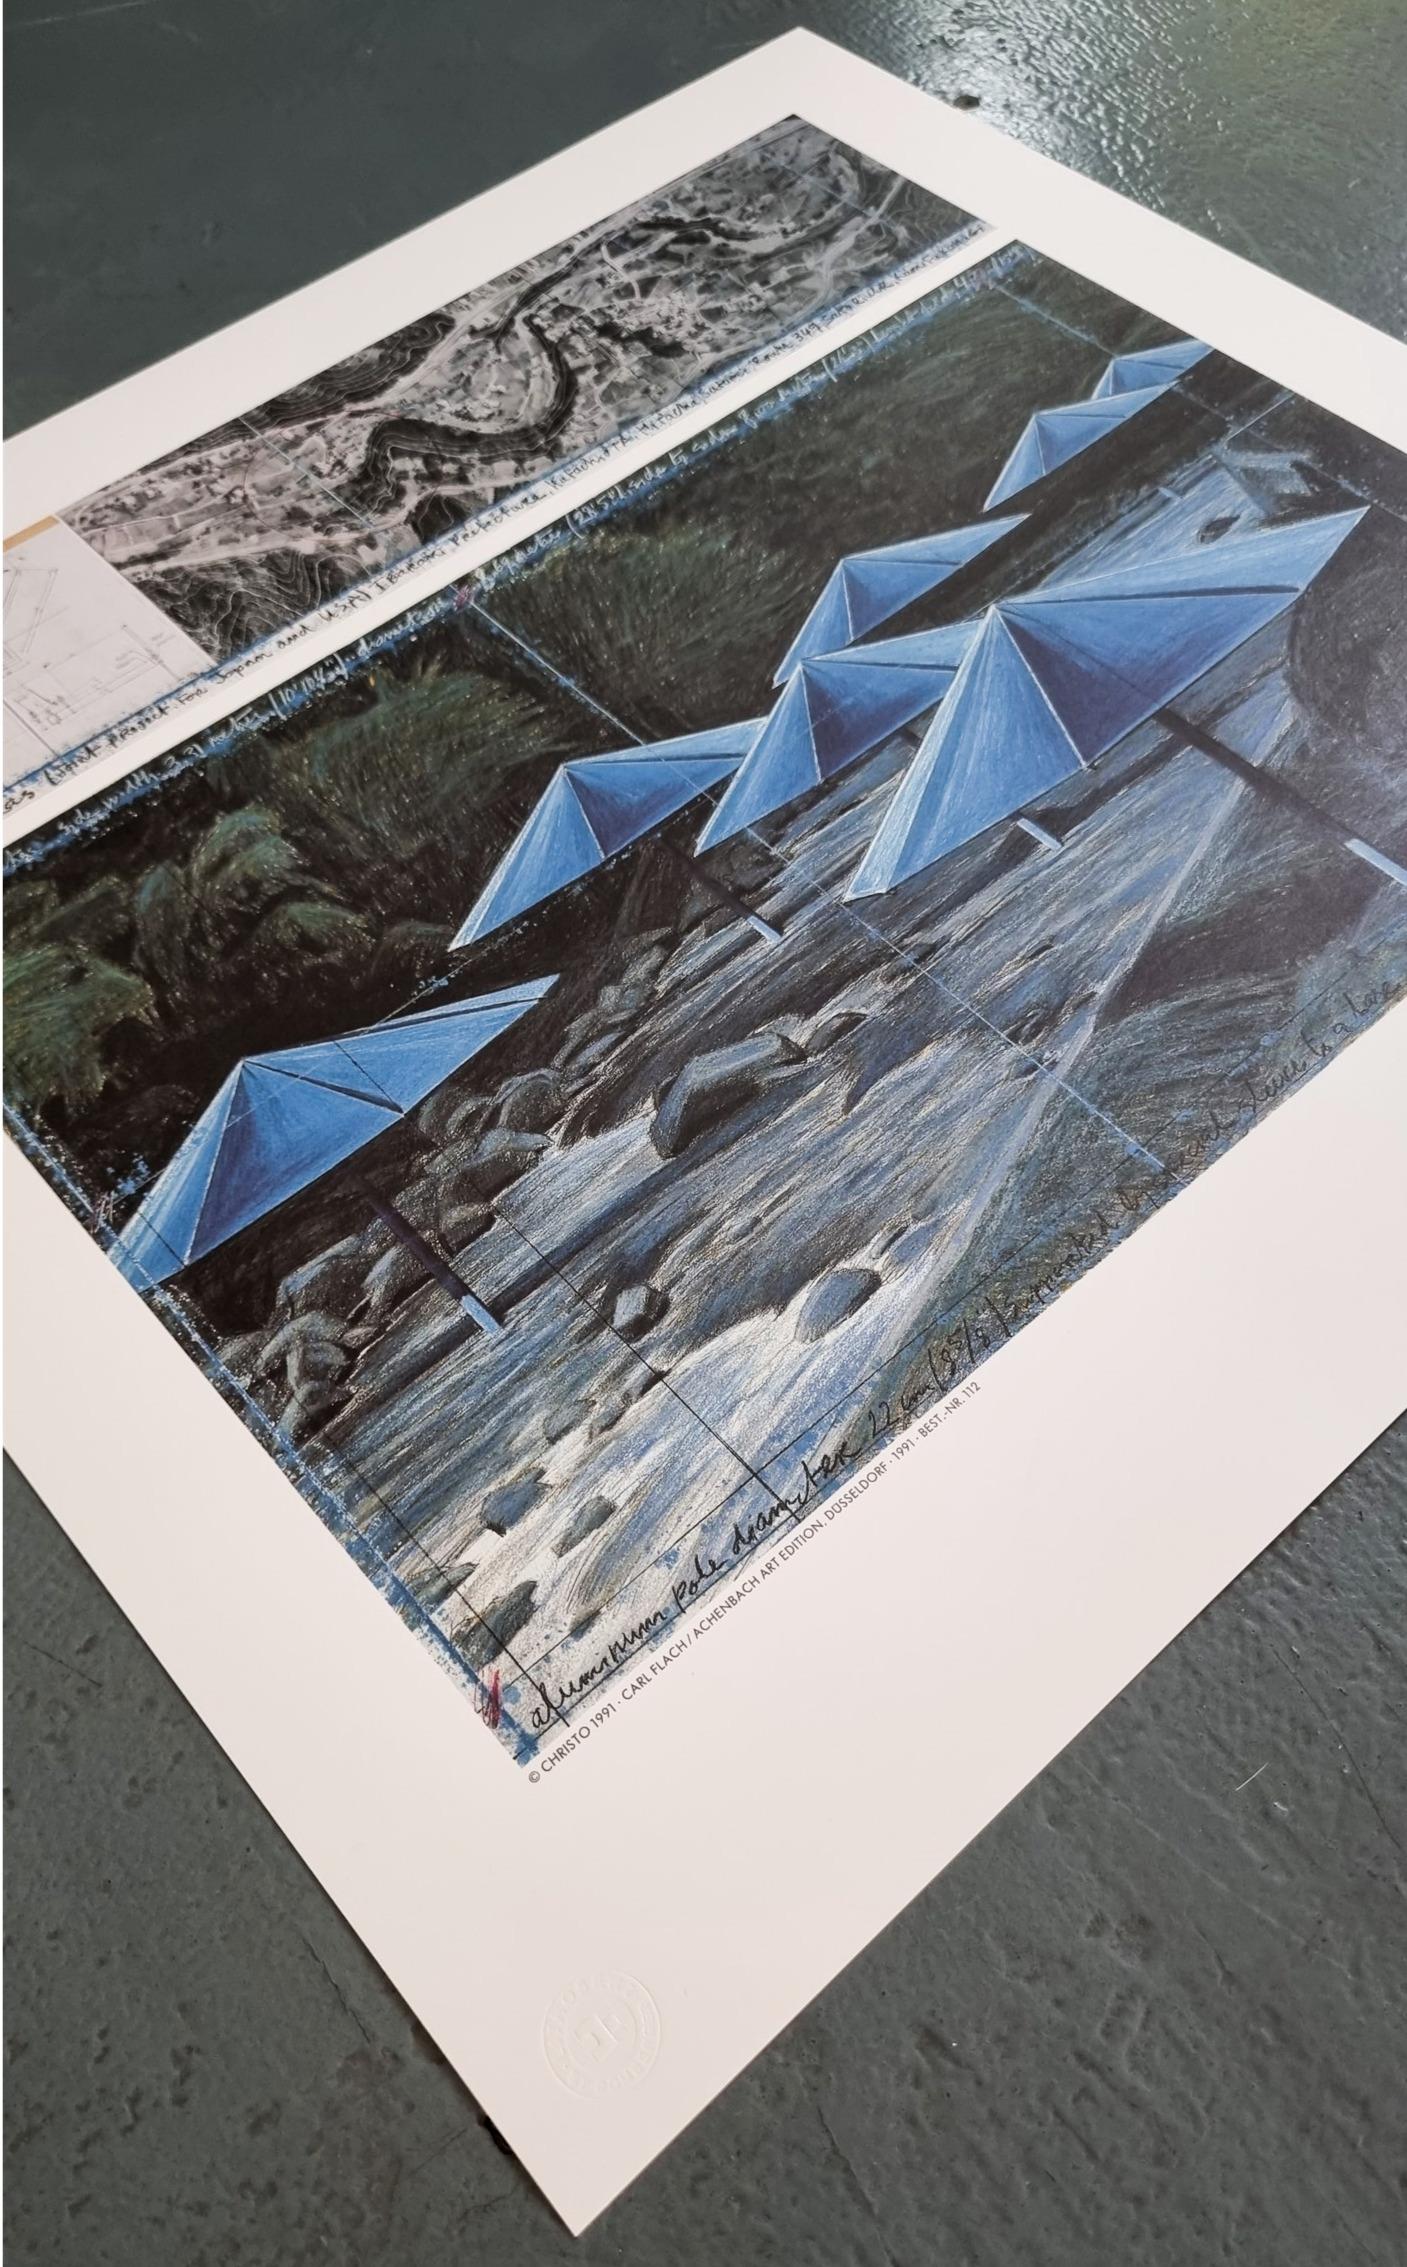 Christo
The Umbrellas (Blue)
Lithoserigraph
Year: 1991
Size: 14.6 × 16.4 on 19.1 × 19.9 inches
Framed: 20.5 x 20.5 x 2.5 inches
Printer's Chop lower left
Printer: Edition Domberger - Stuttgart, Germany
Publisher: Achenbach Art Editions, Duesseldorf,